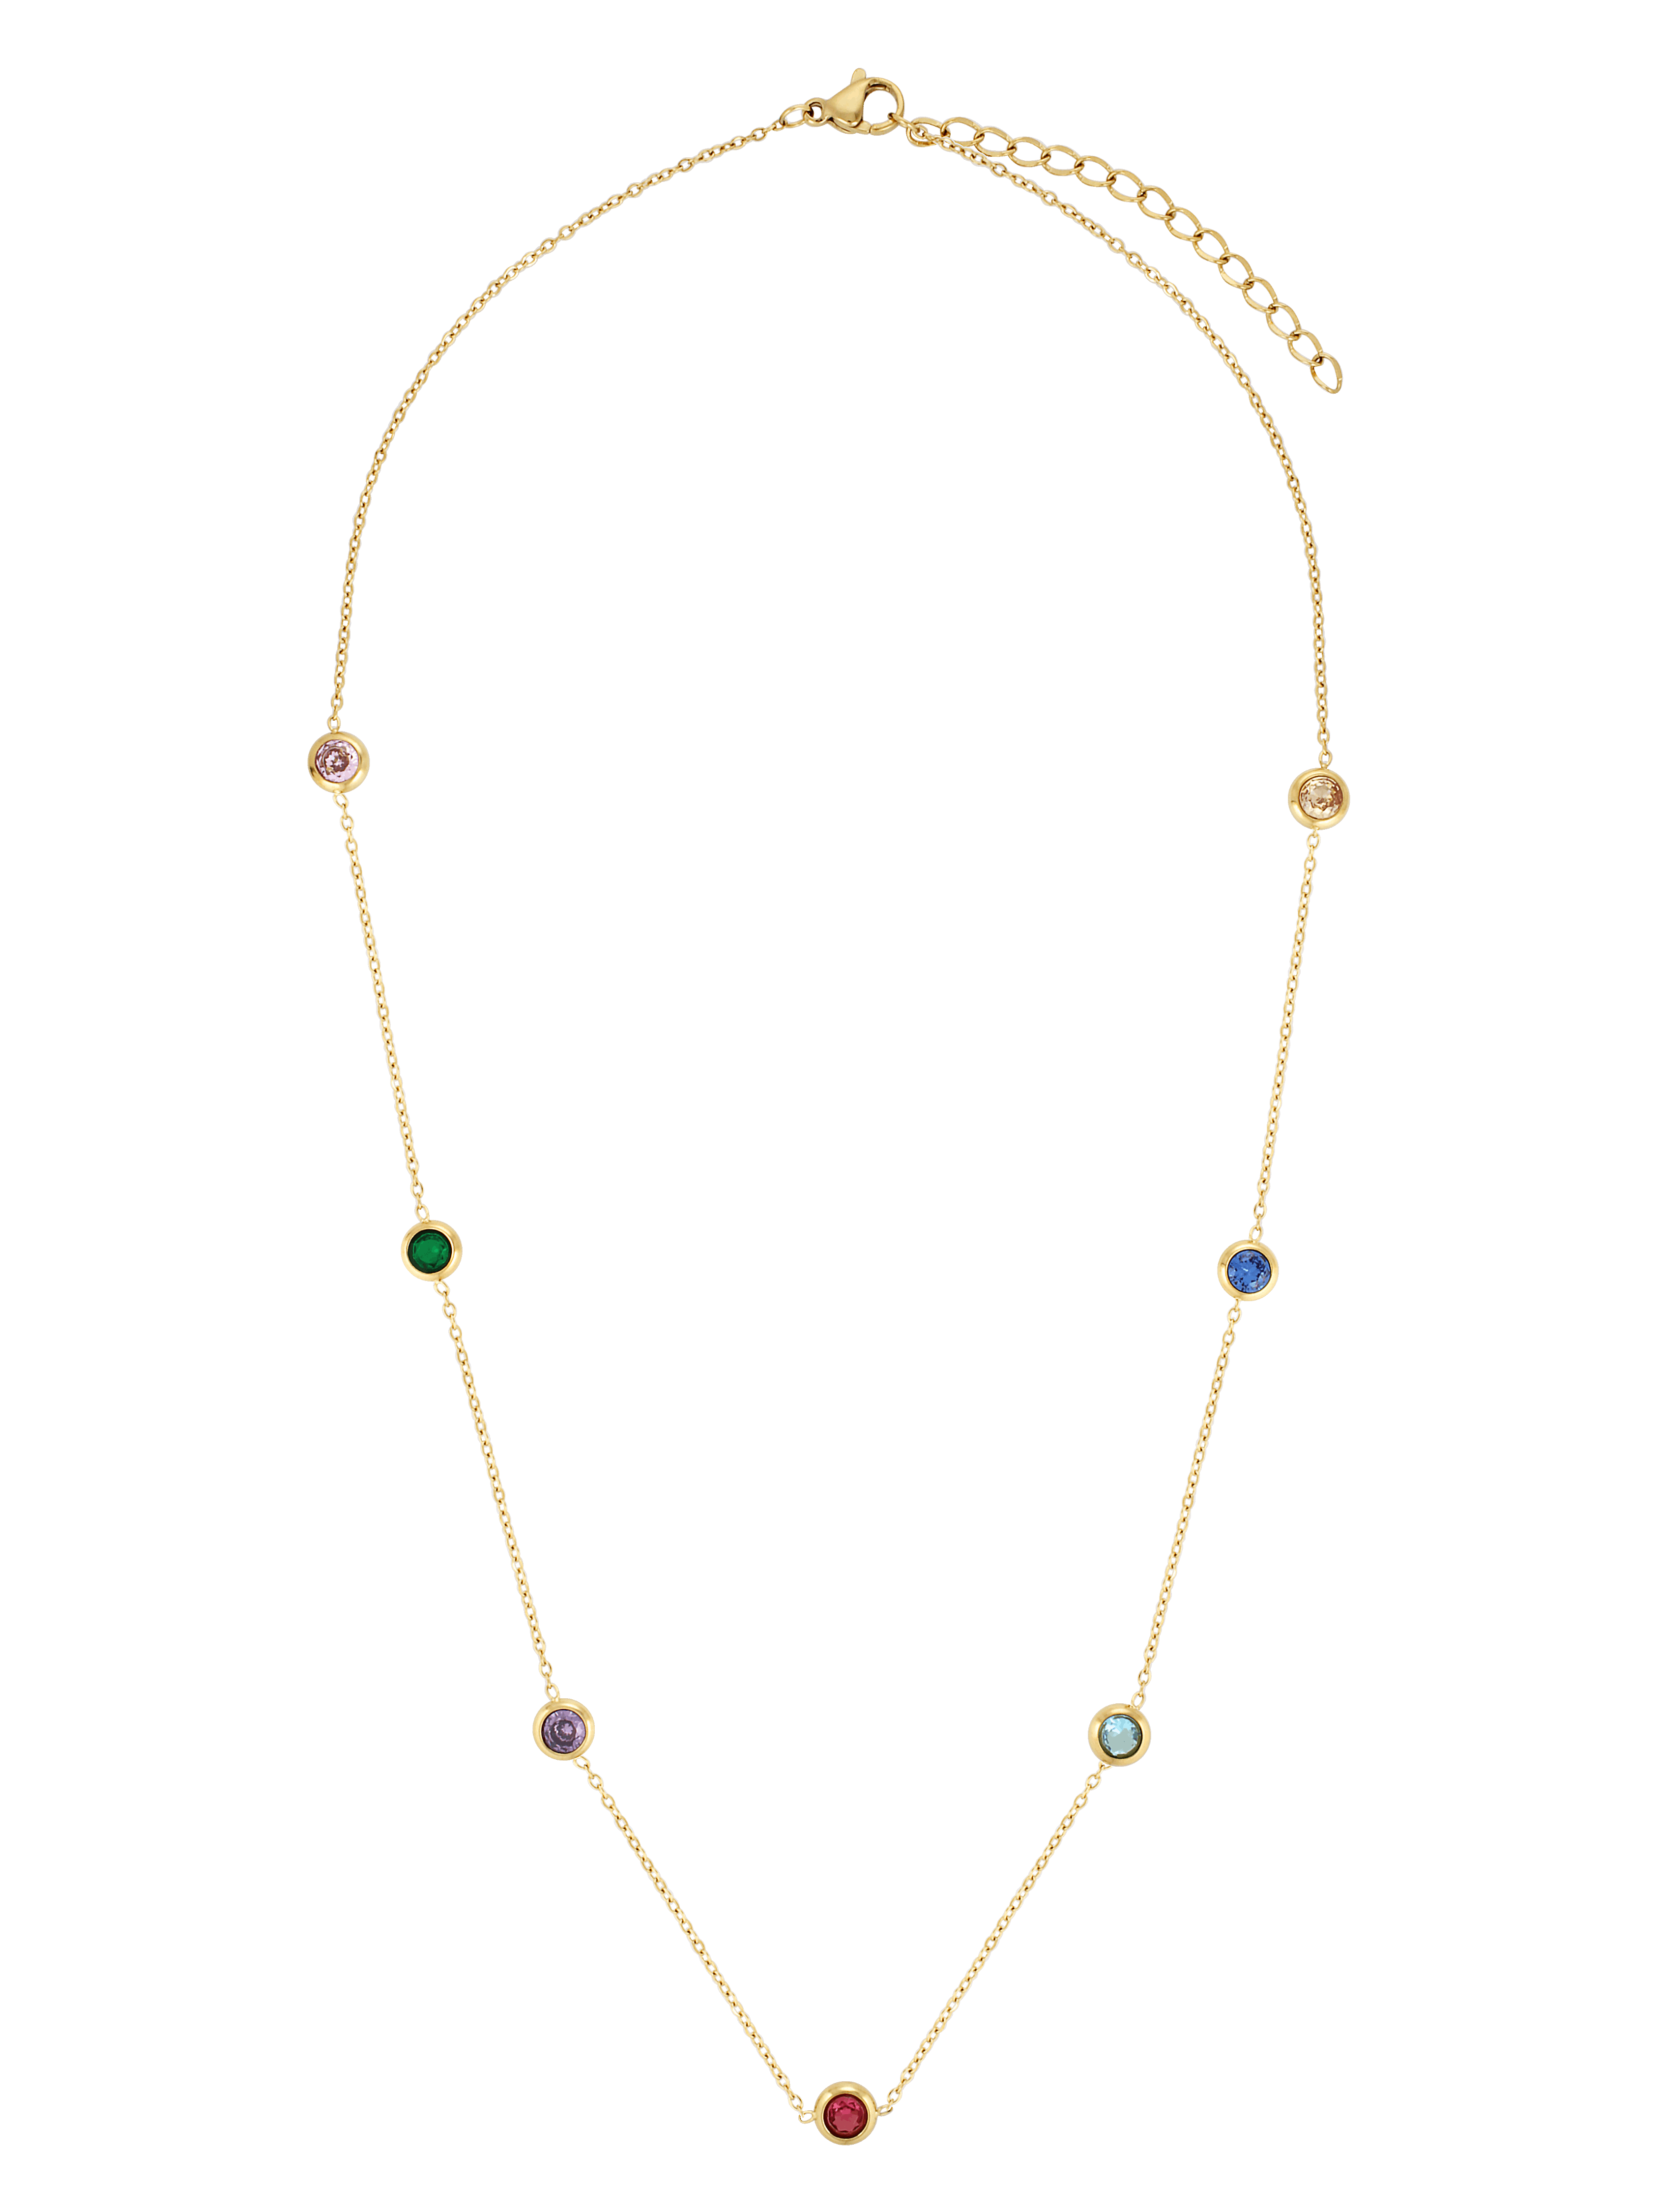 Sprinkle Necklace in gold 